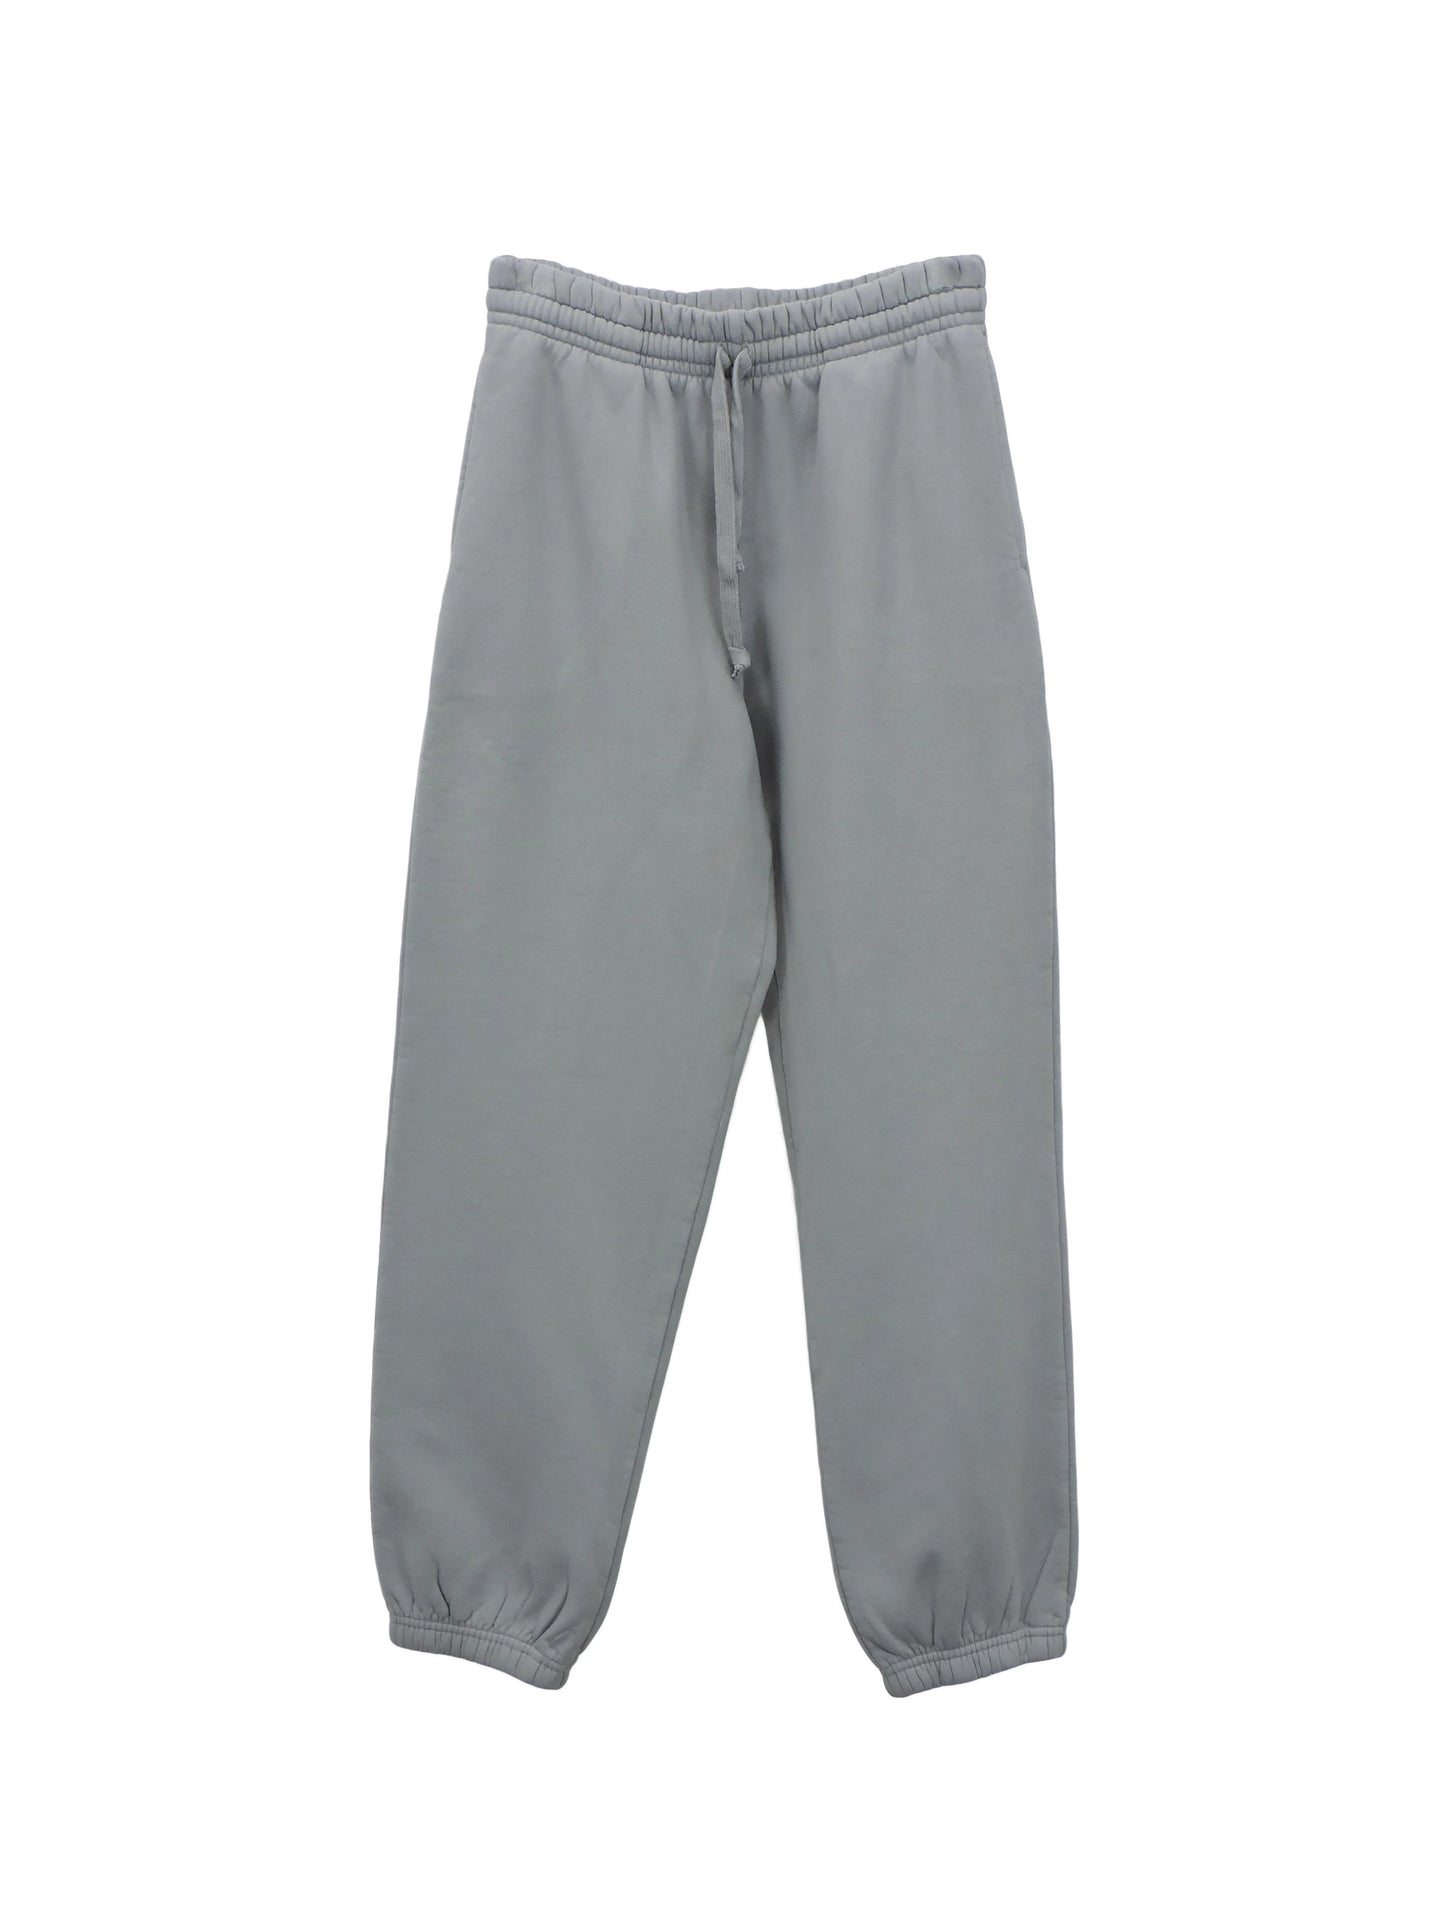 Front of Grey Heavy Fleece Sweatpants with flexible waistband and ankle cuffs.